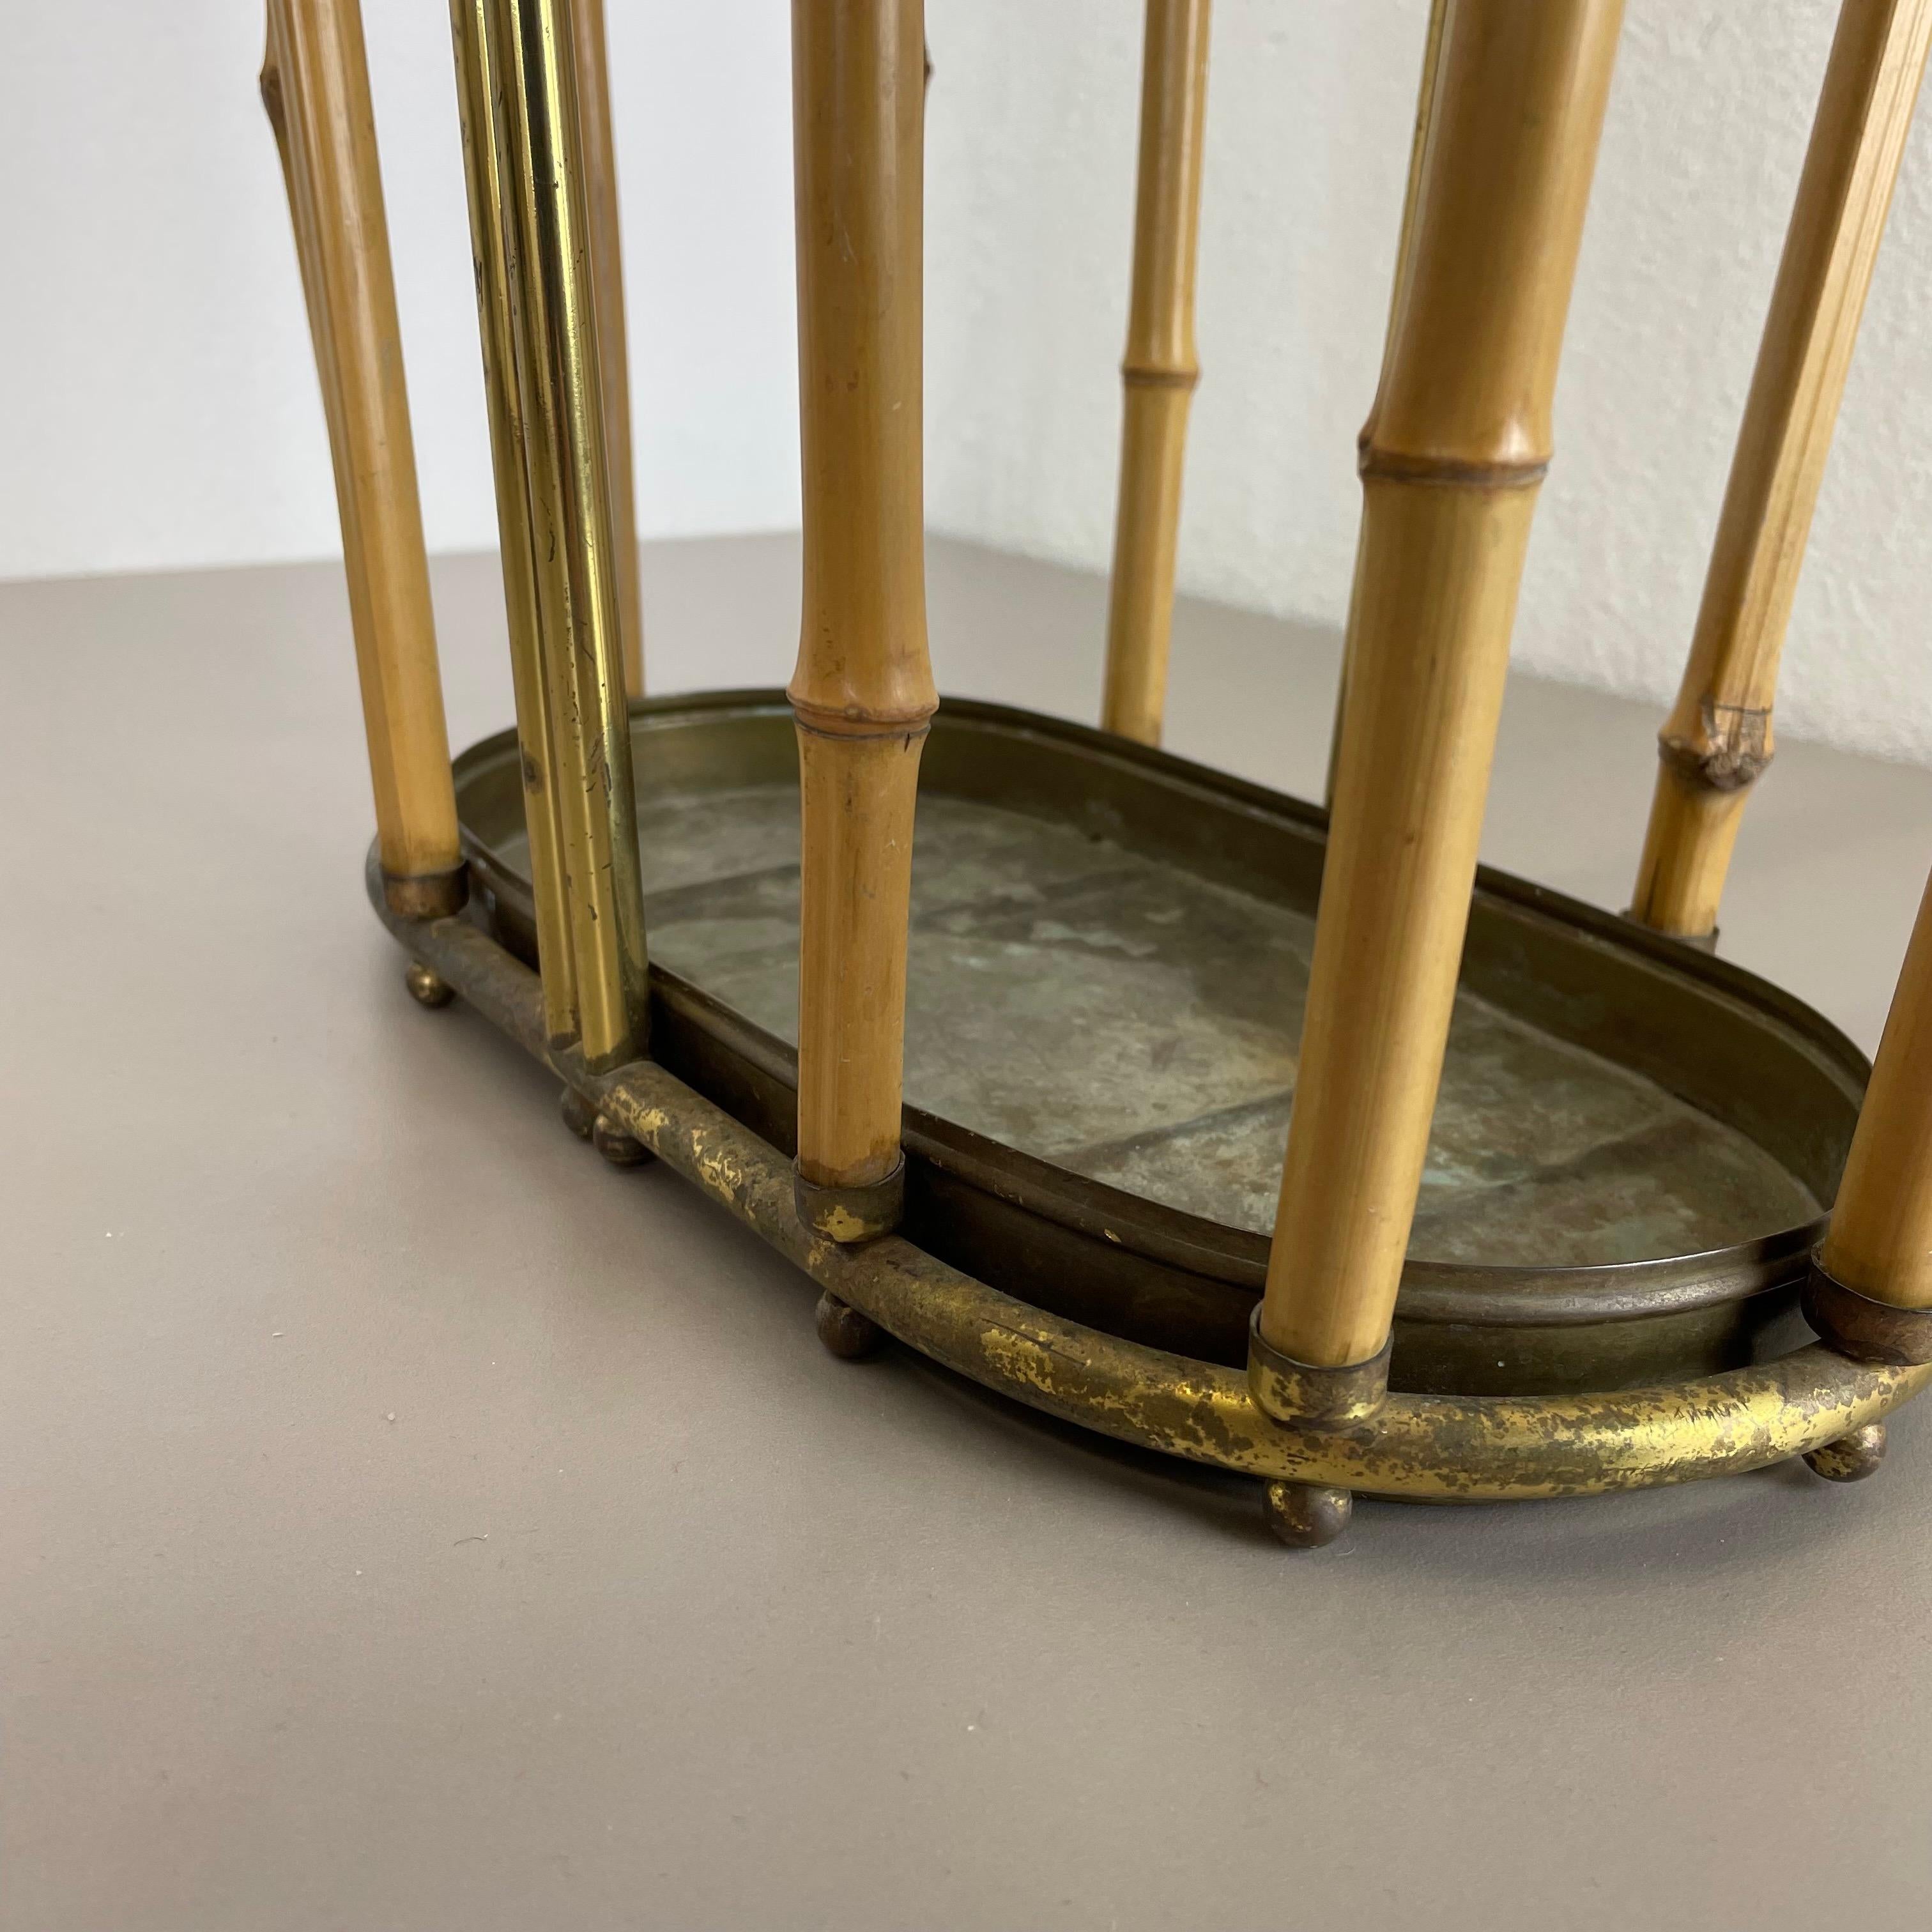 Hollywood Regency Auböck Style Brass Bamboo Umbrella Stand, Austria, 1950s For Sale 7